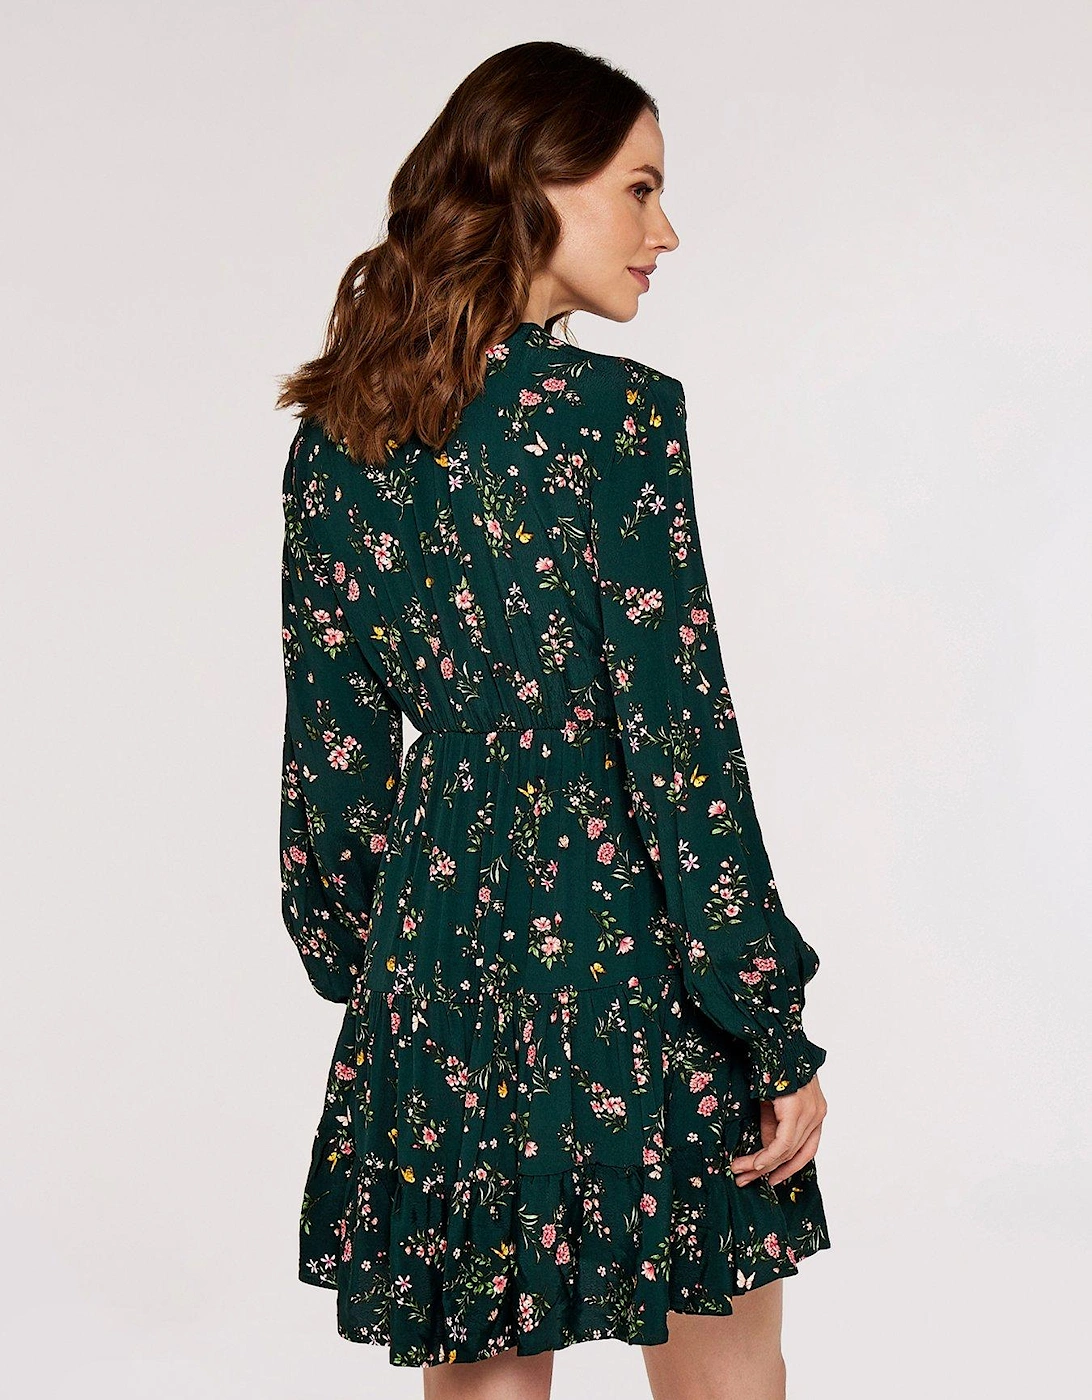 Soft Floral Tiered Dress - Green 